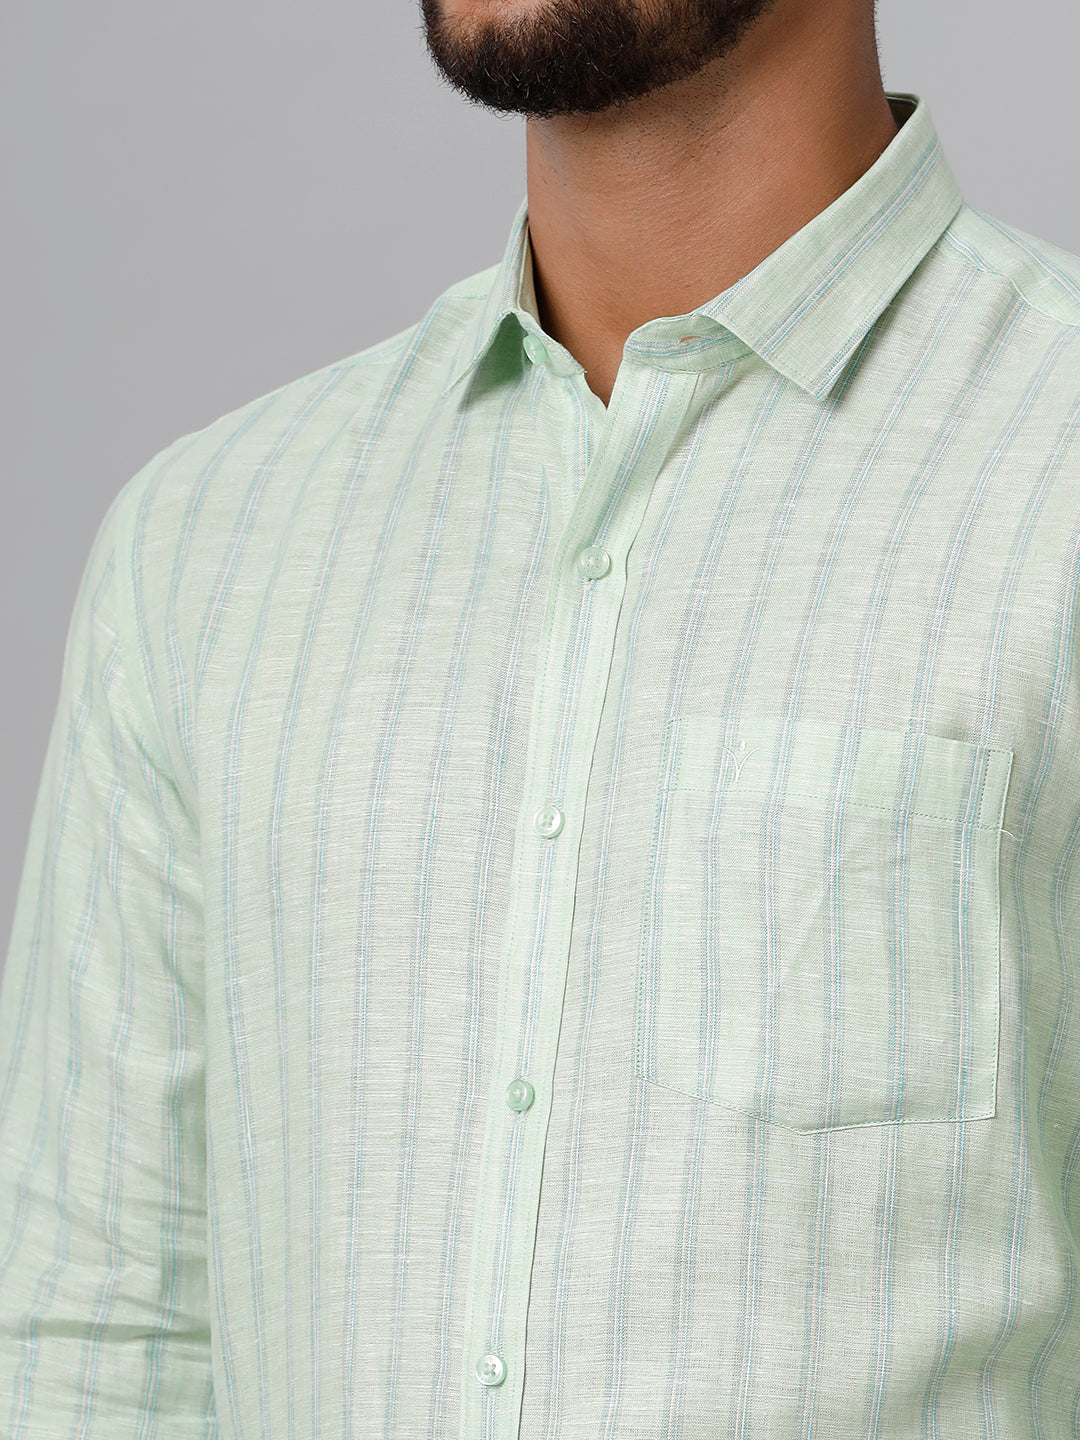 Mens Pure Linen Striped Full Sleeves Pista Green Shirt LS10-Zoom view